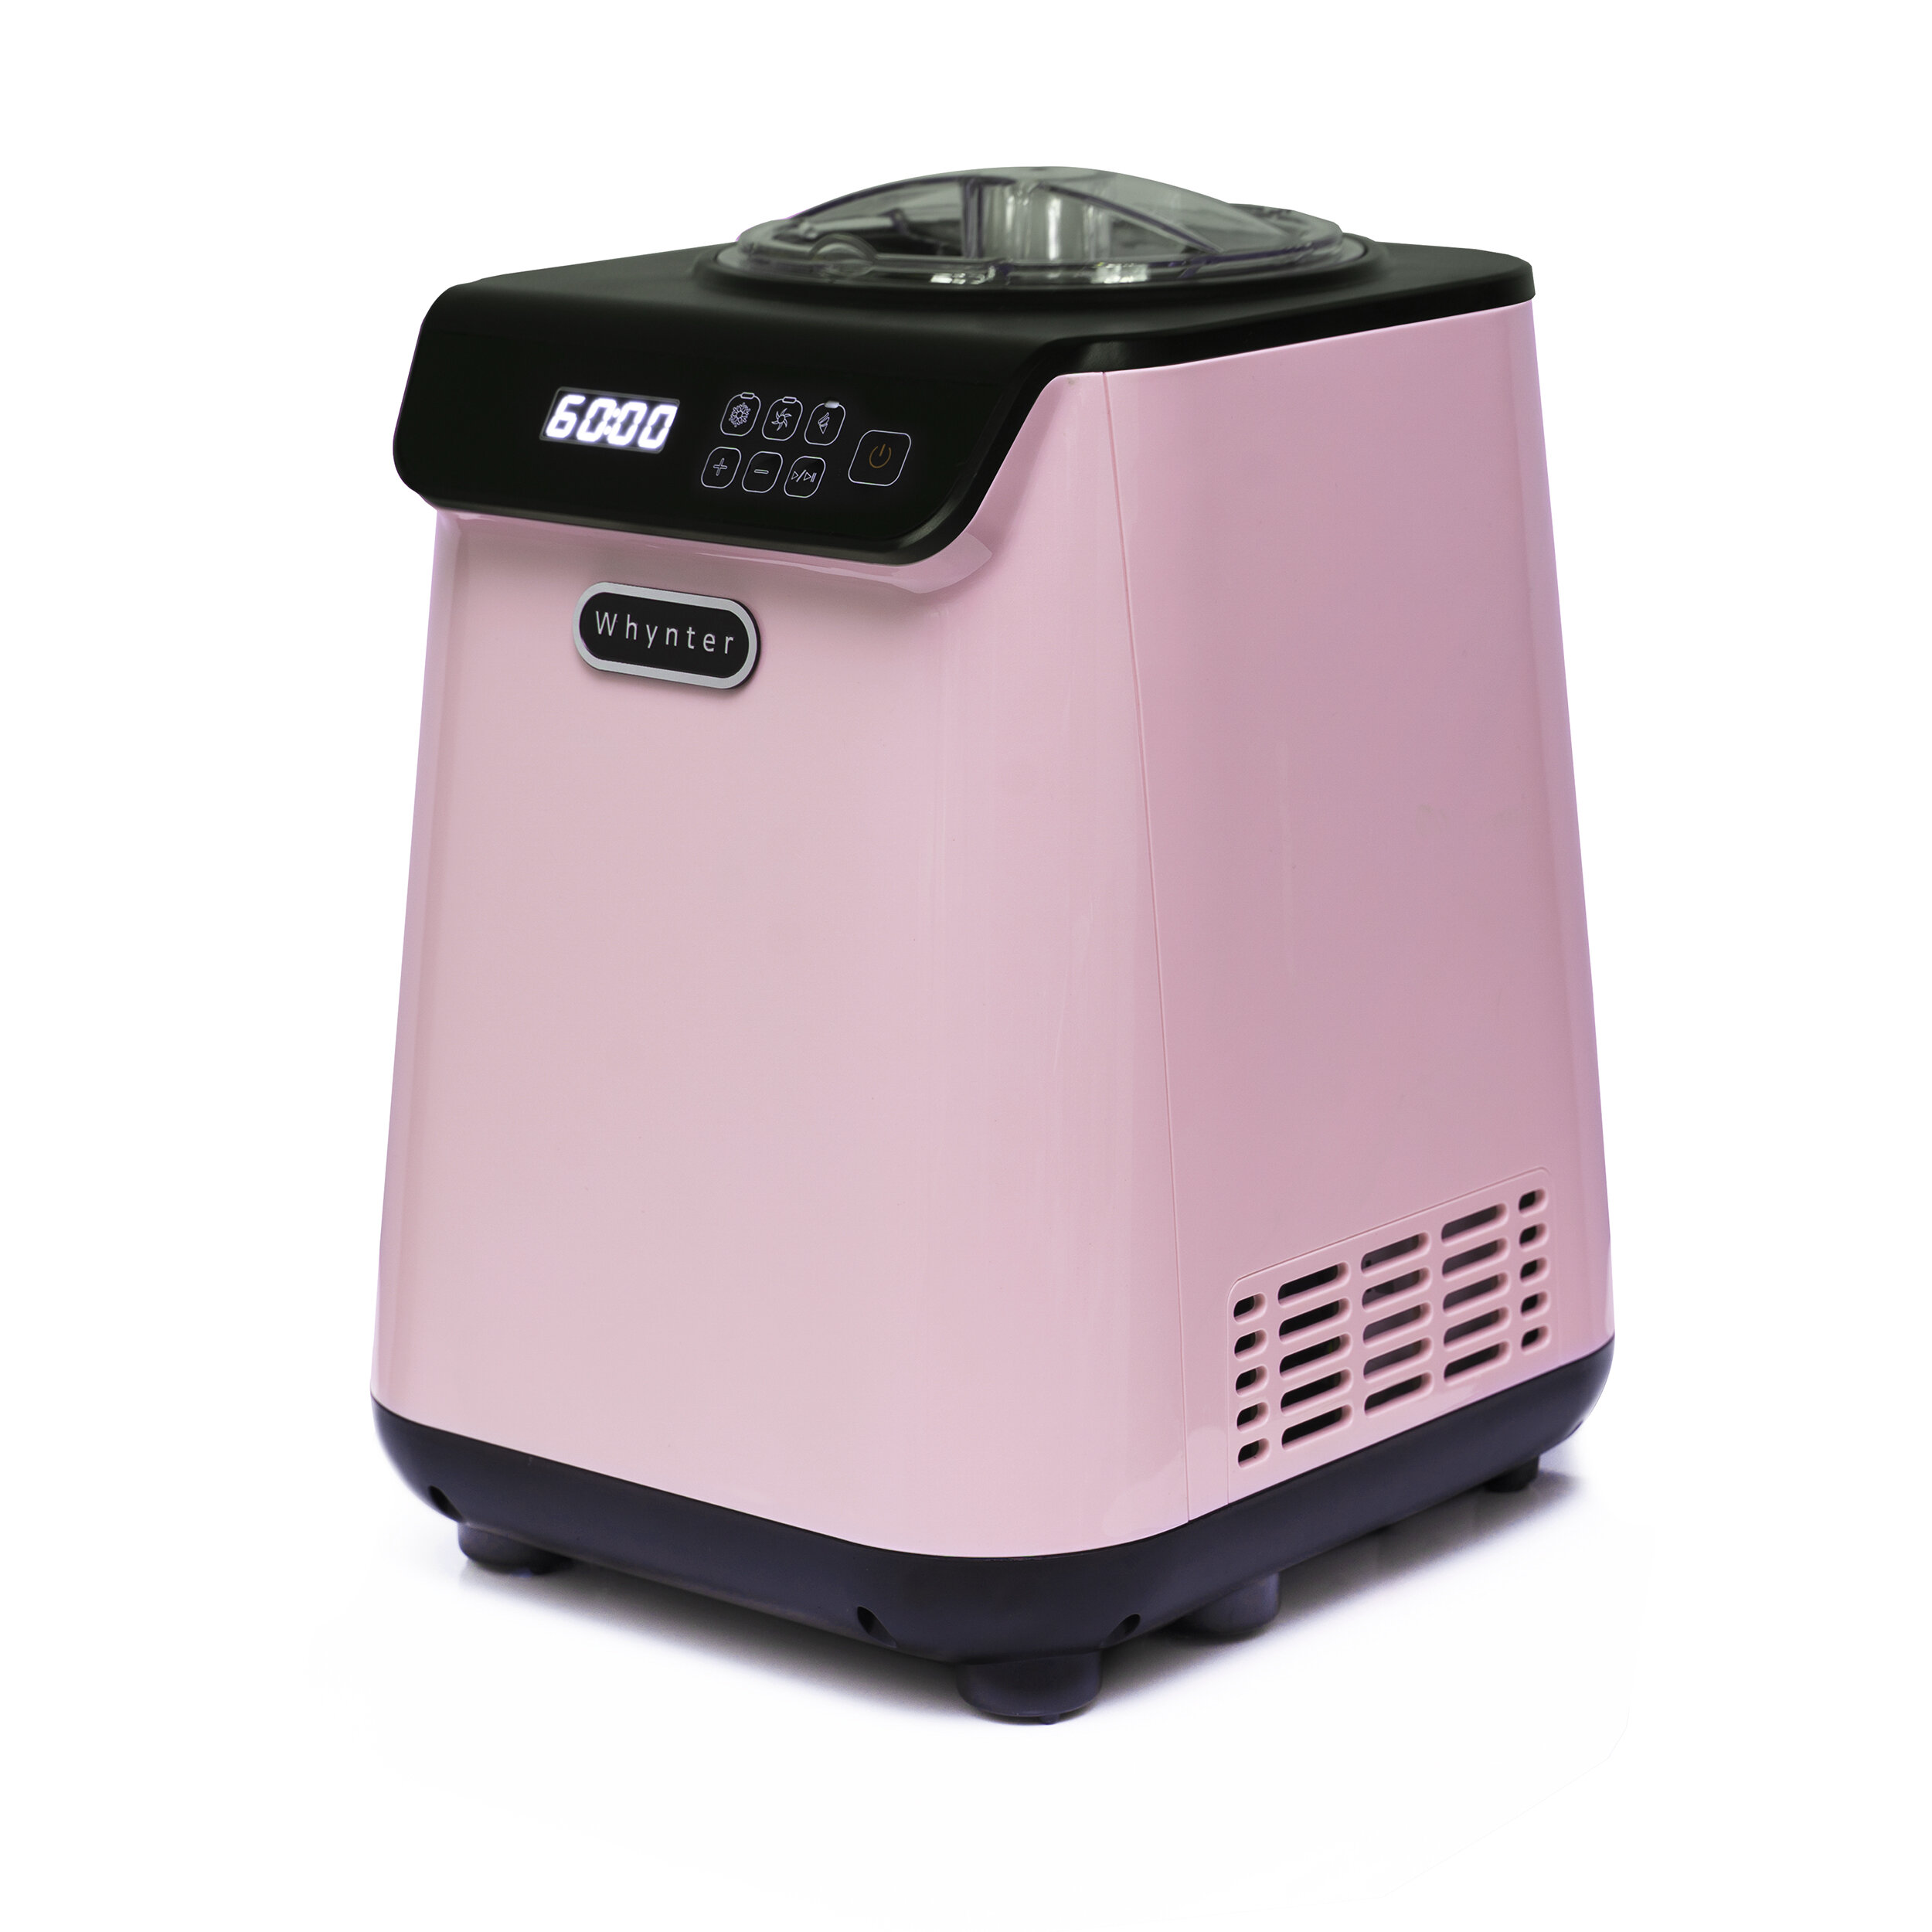 Whynter 1.28 Quart Compact Ice Cream Maker with Stainless Steel Bowl Pink